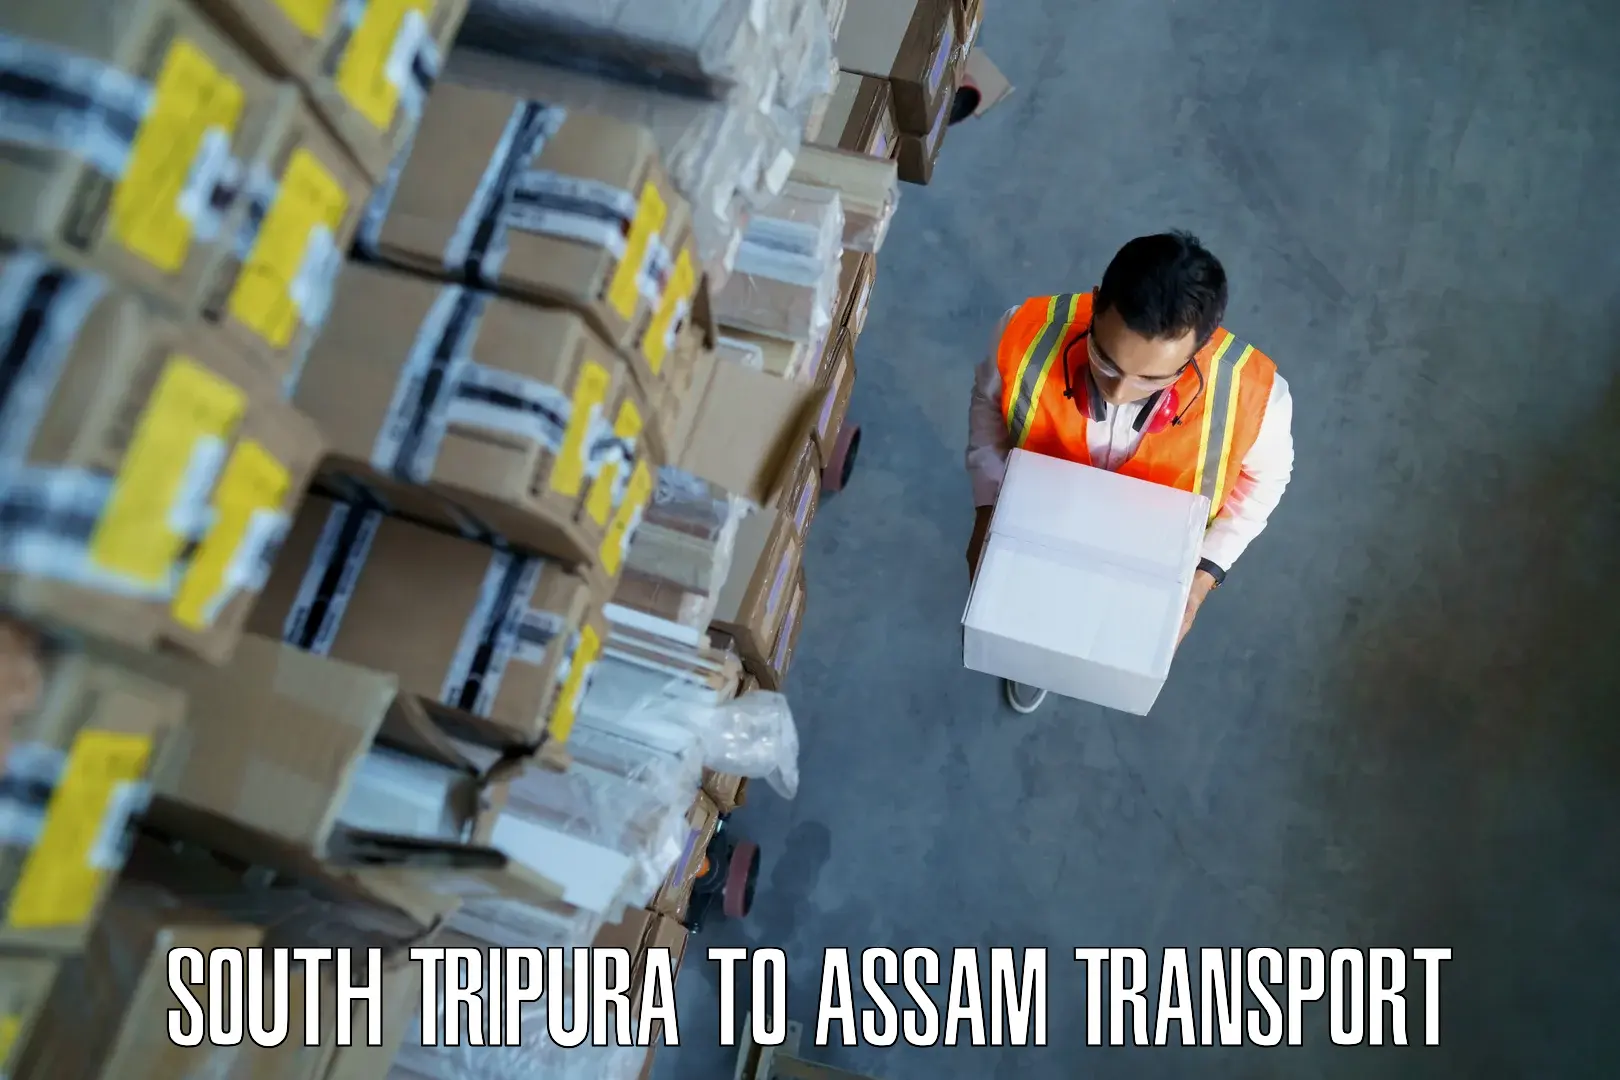 Vehicle transport services in South Tripura to Dhekiajuli